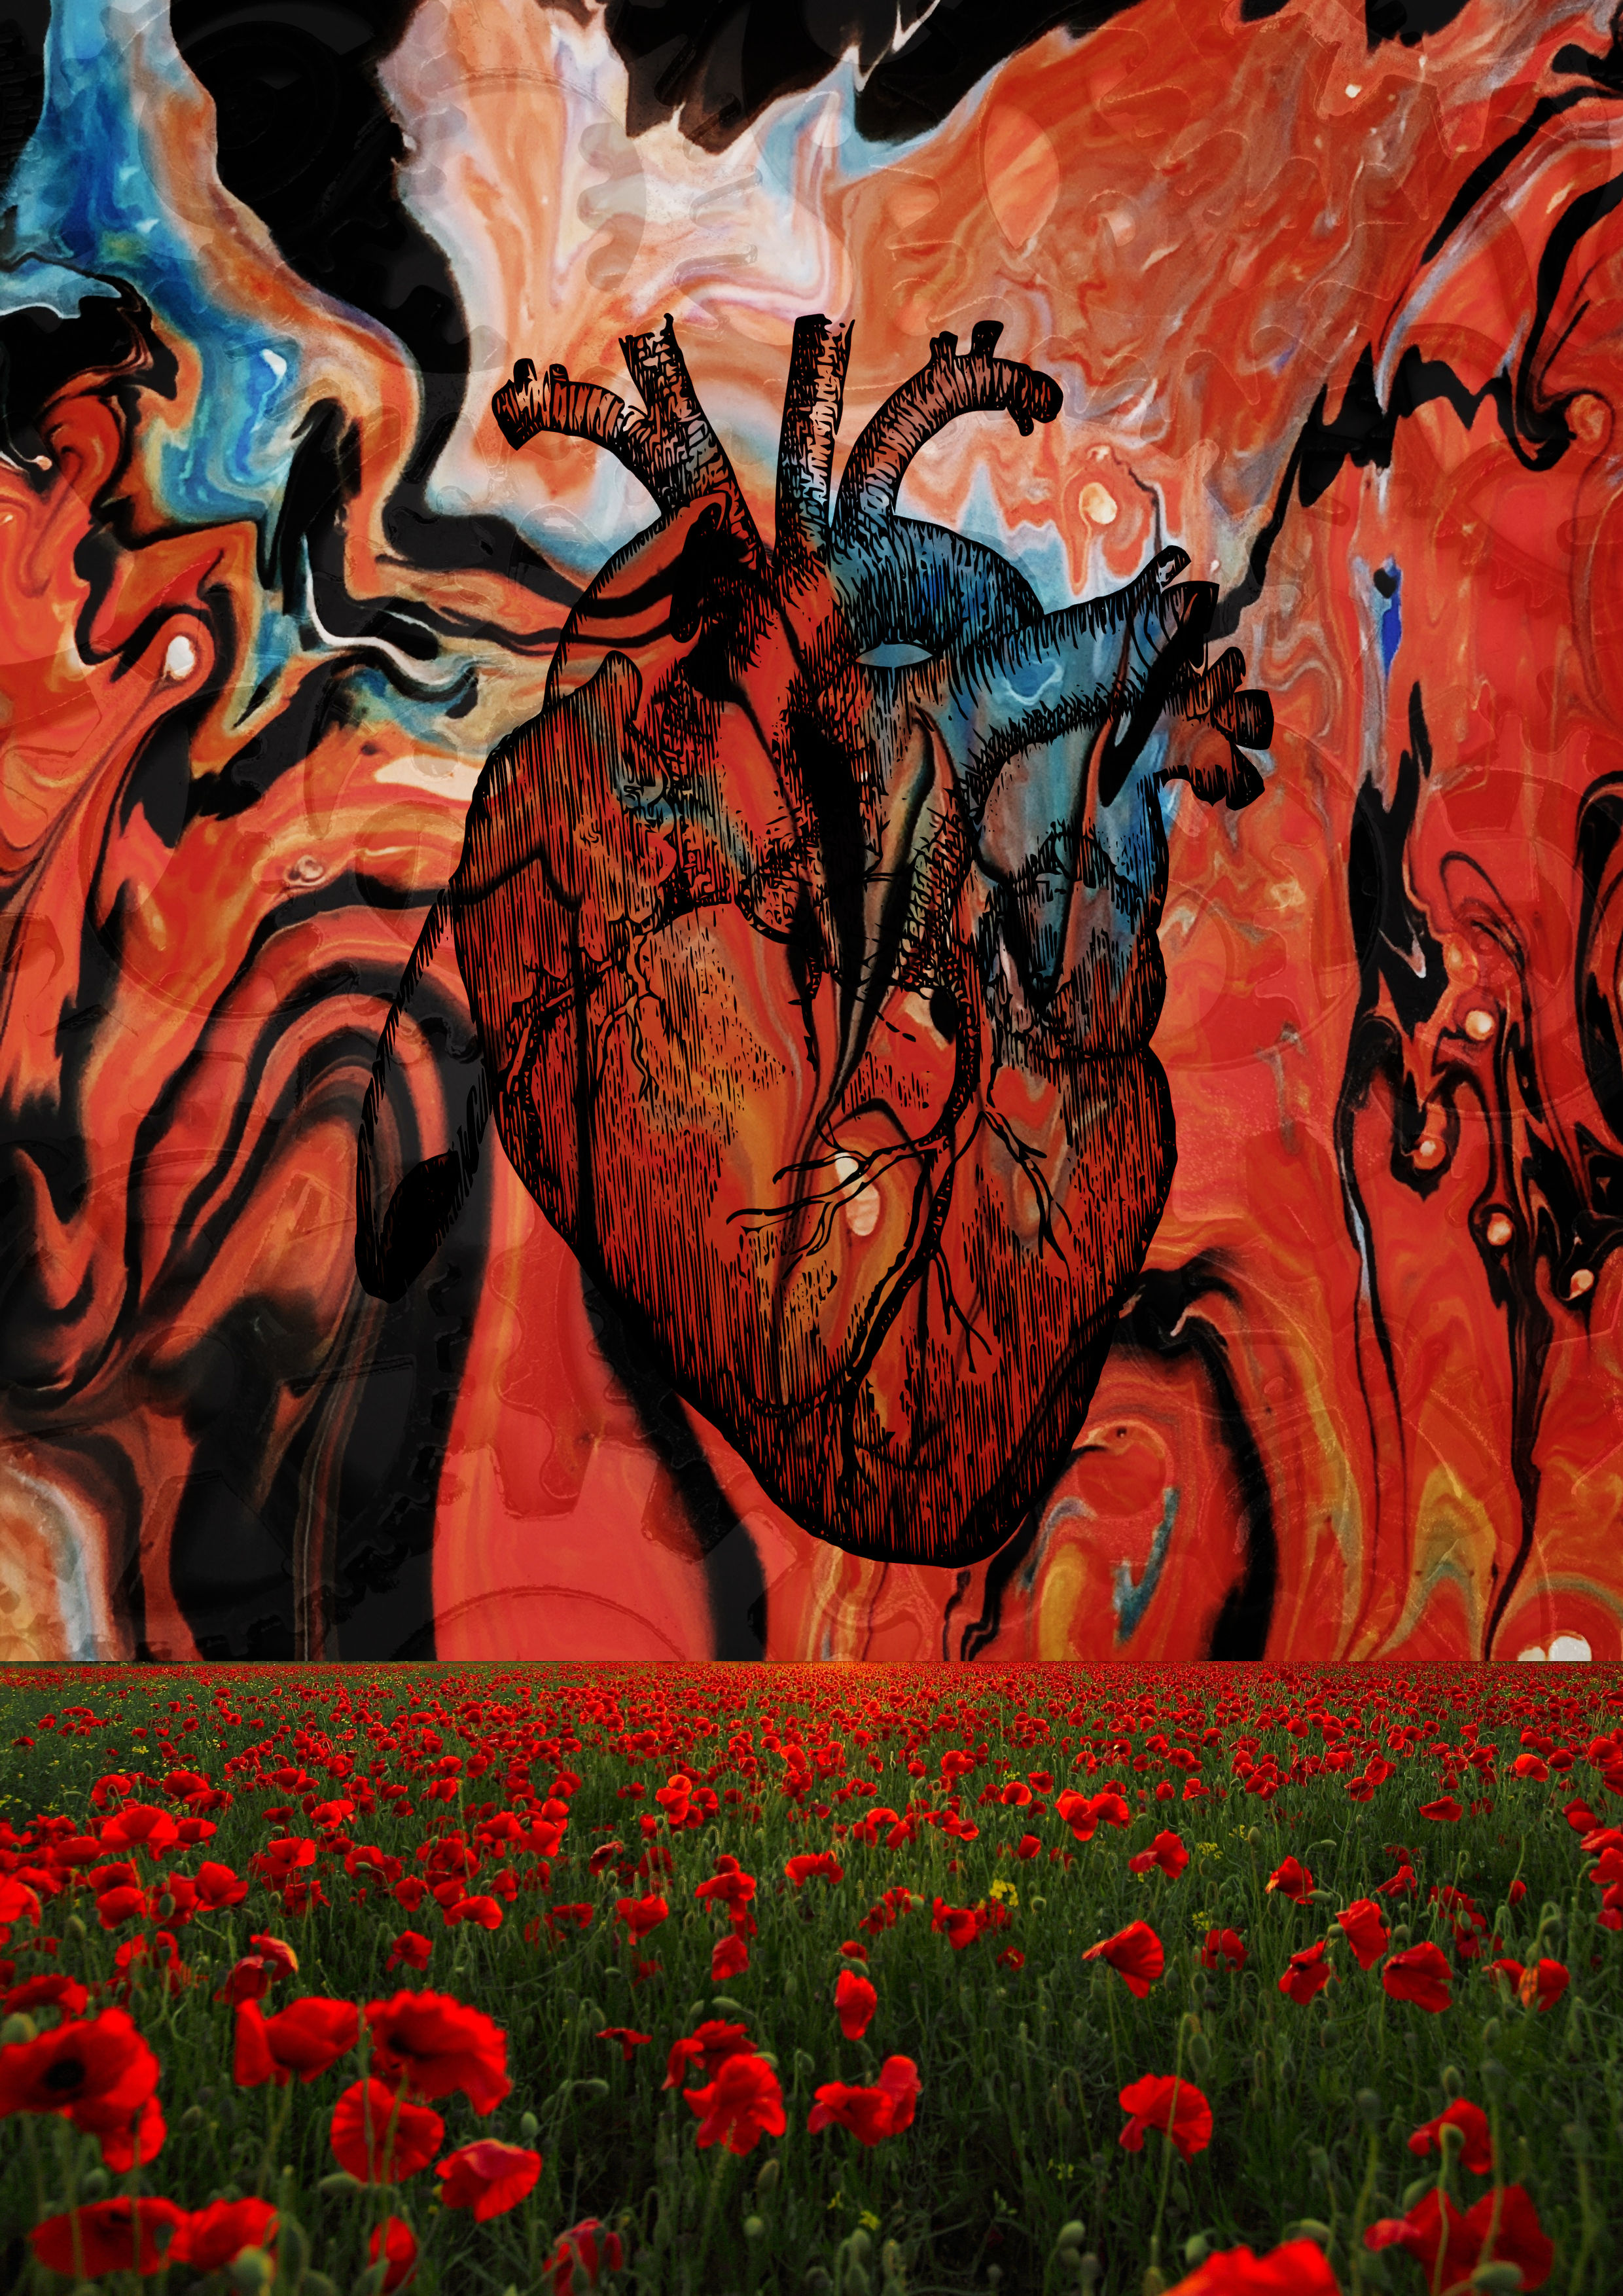 foreground: a field of red poppies. background: swirls of red with streaks of black and some blue and a human heart, rendered against them in black linework. if you look closely, shapes of gears are visible thru the colour-swirls